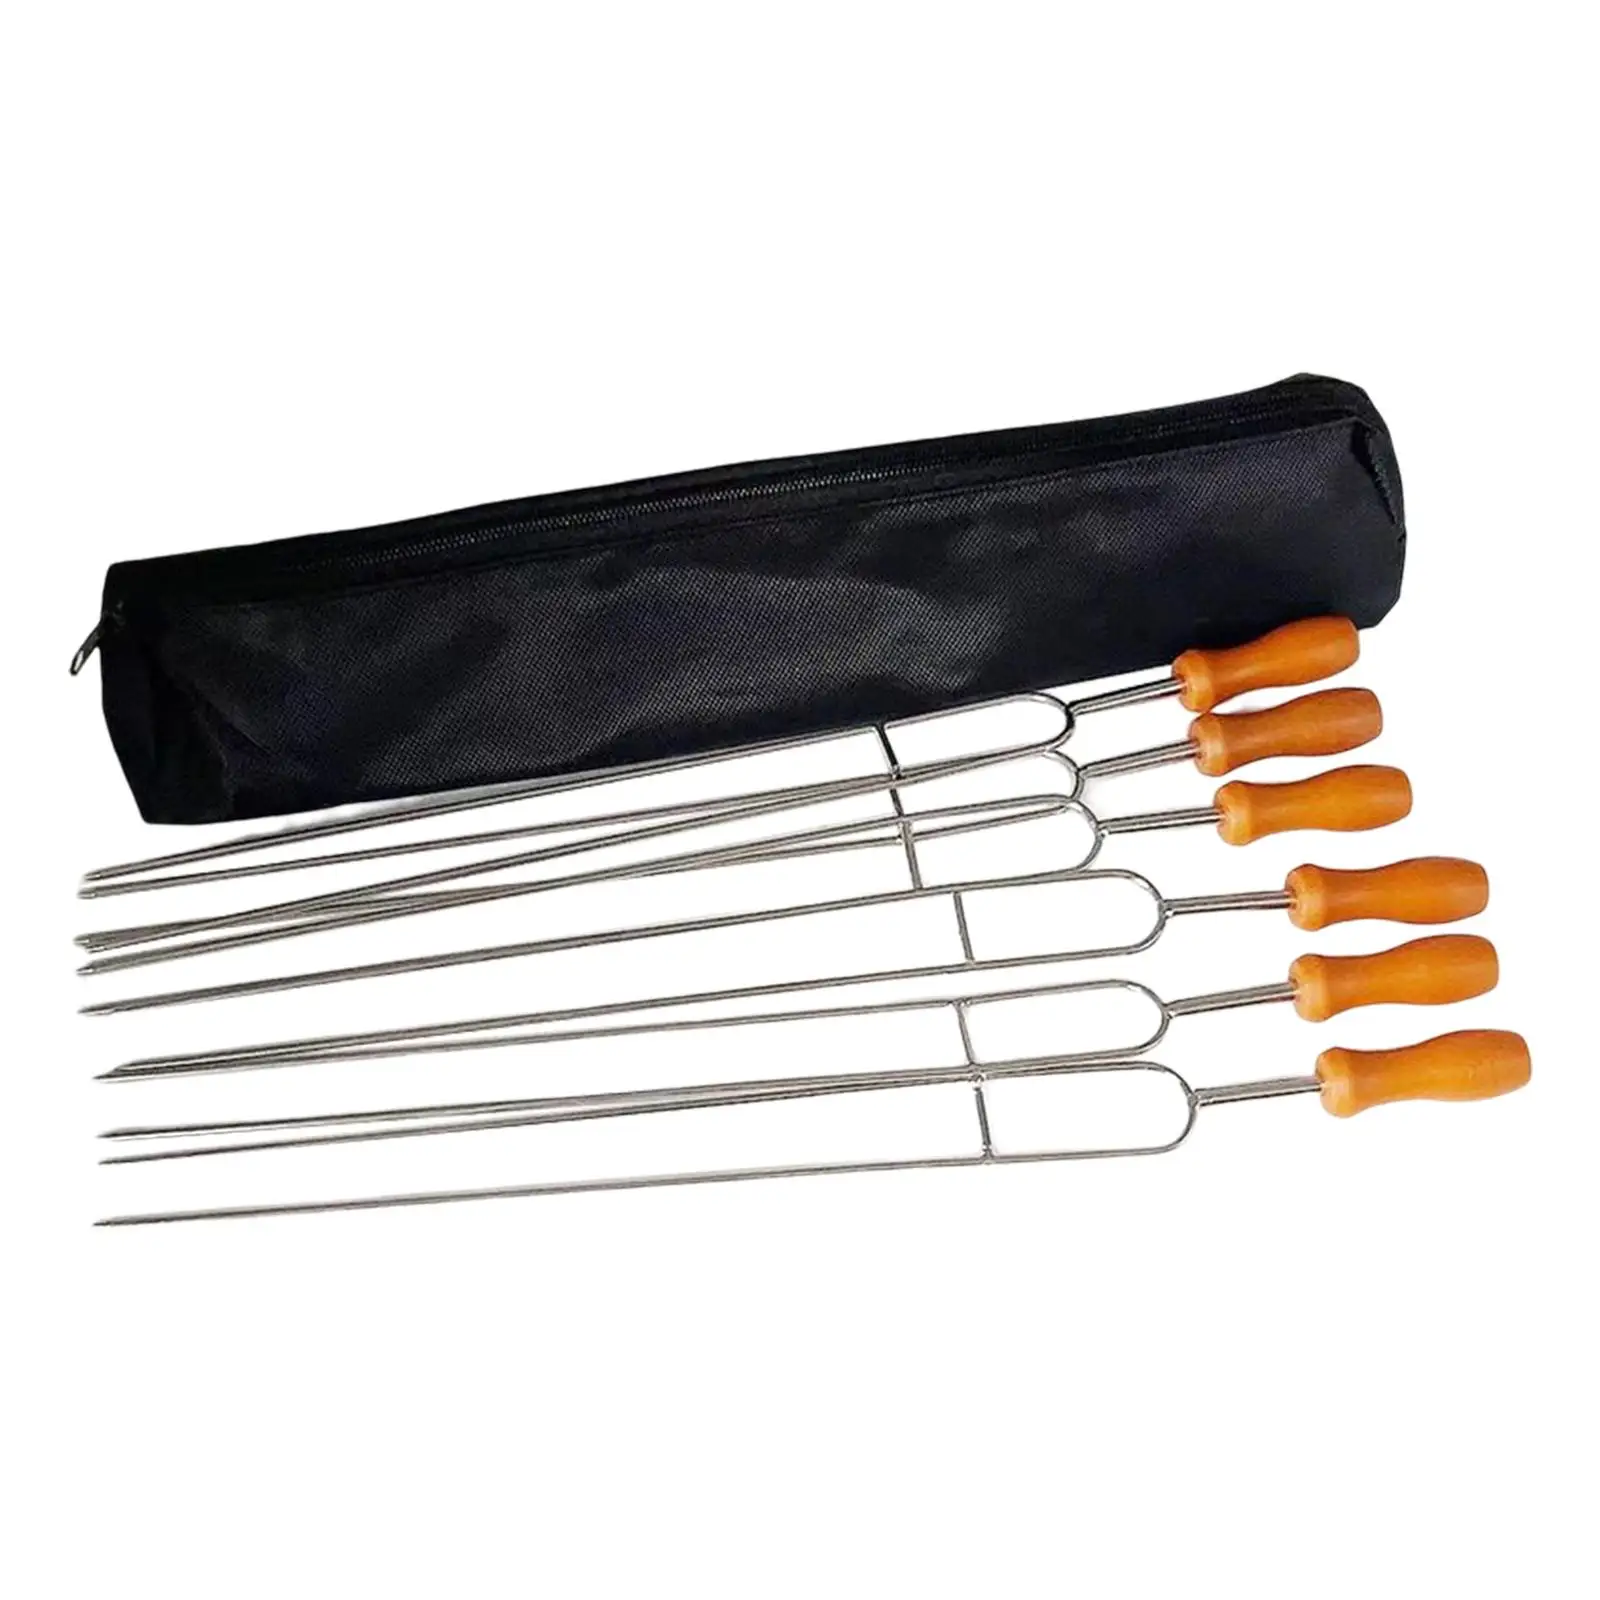 6x Roasting Forks BBQ Skewers Barbecue Forks Stainless Steel Long Fork for